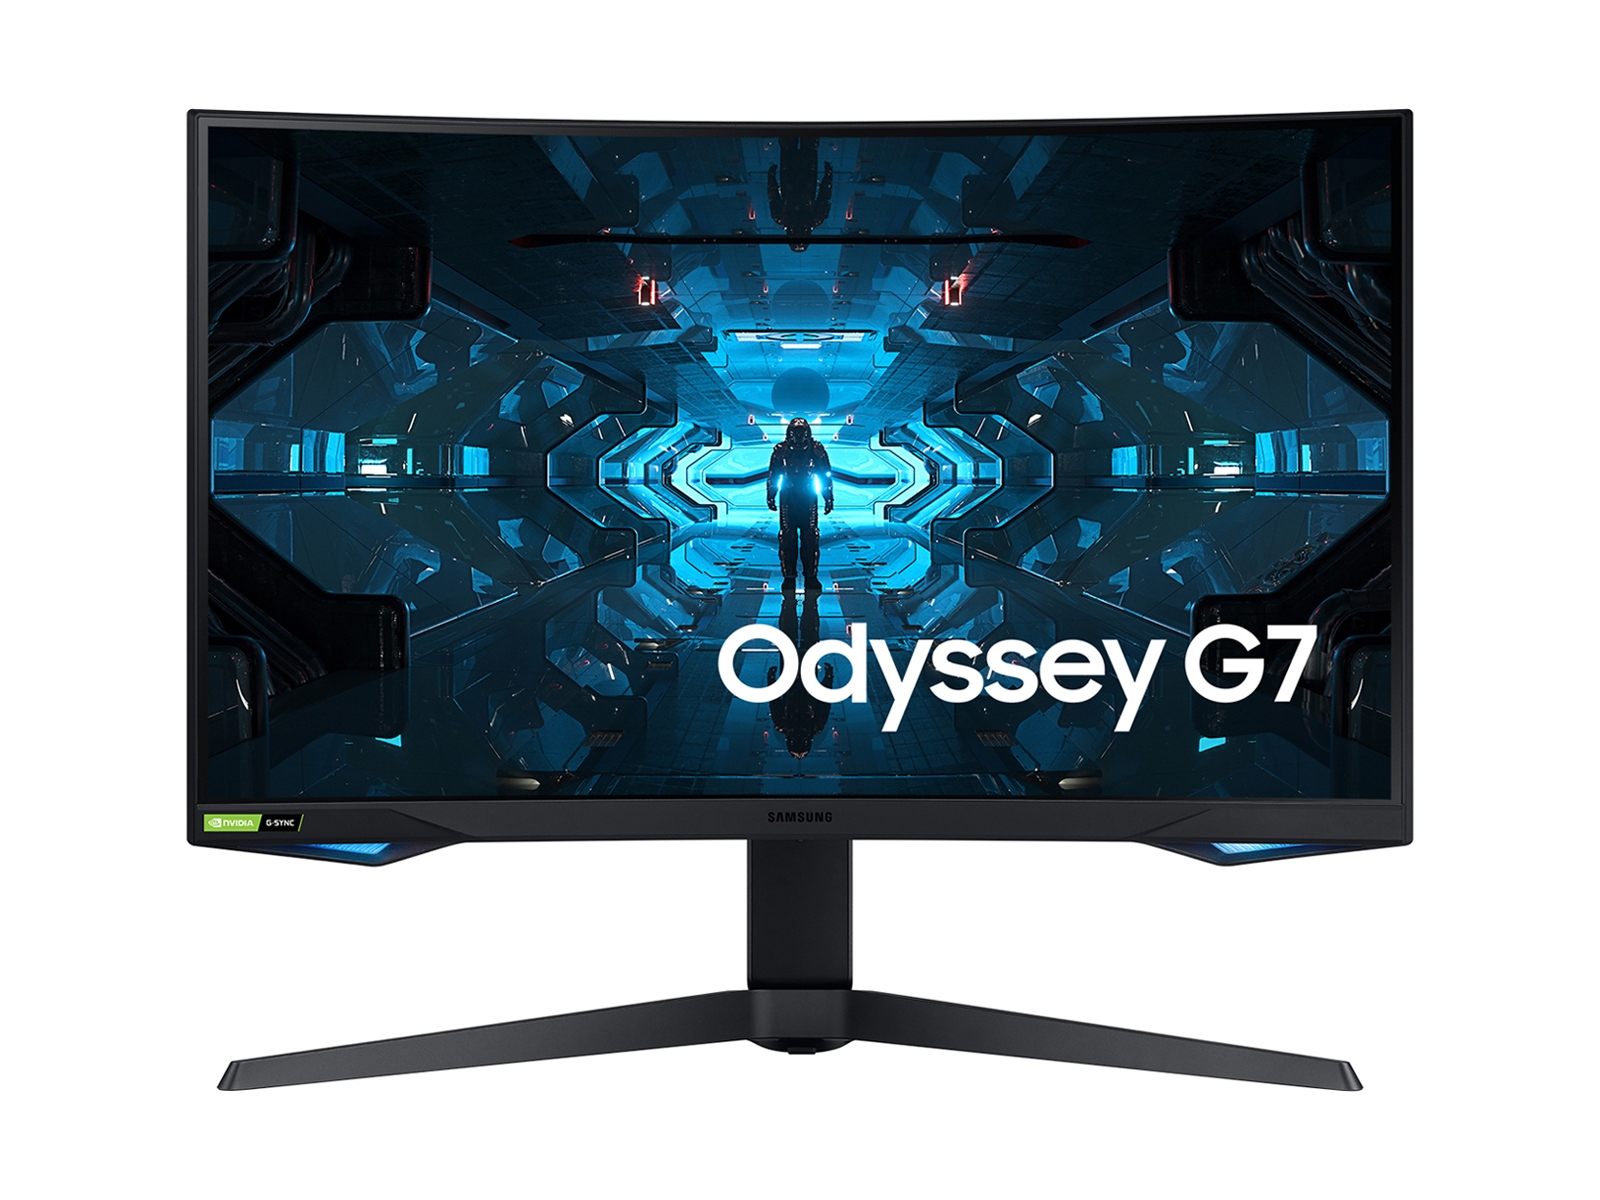 Odyssey G7 Series 32 QHD Curved Monitor